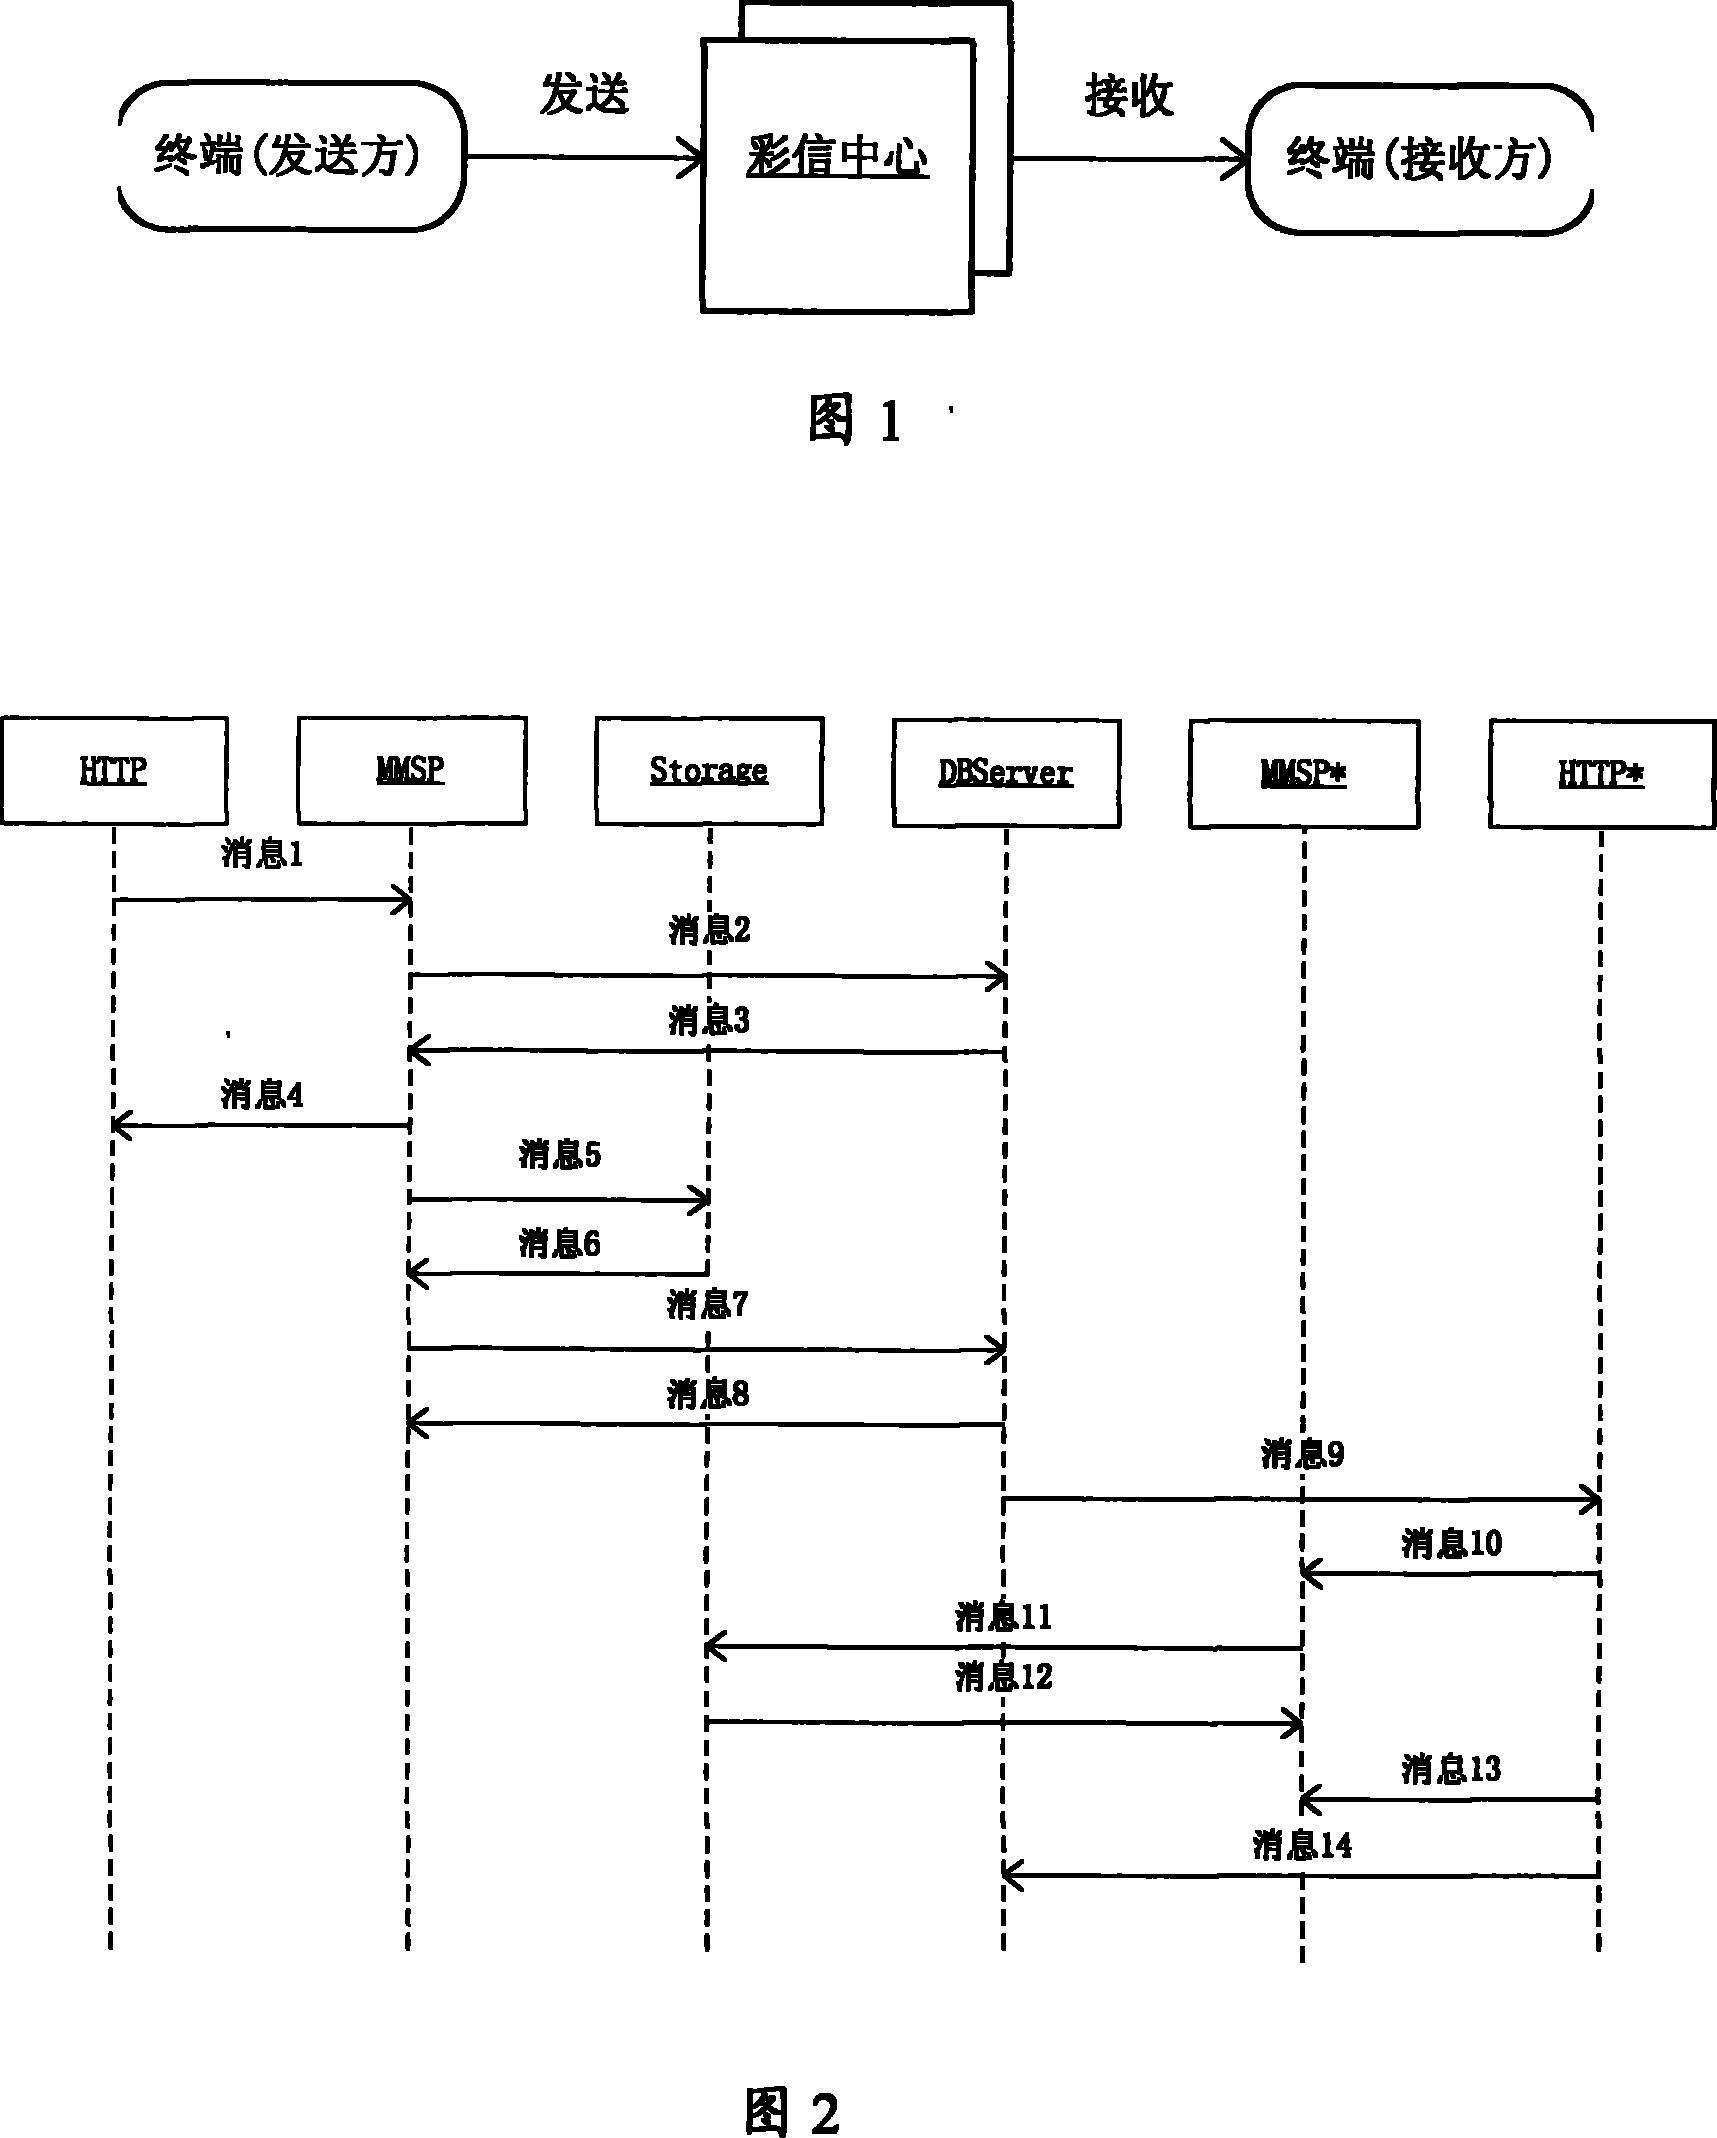 Distributed database based on multimedia message log inquiring method and system